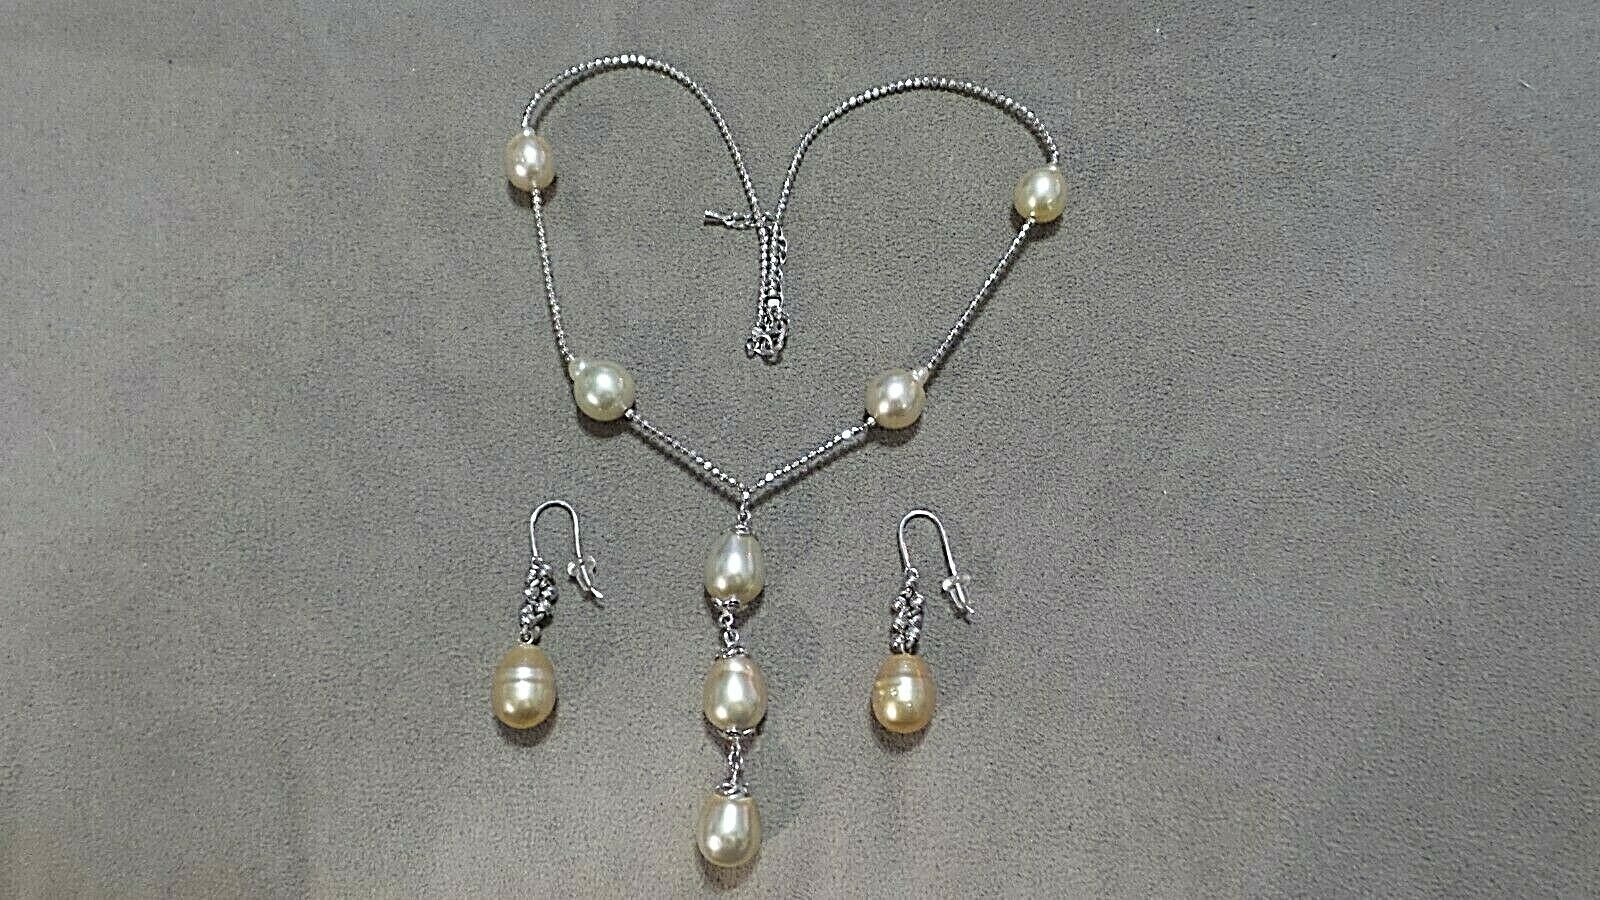 Nwot Ruelala Ss 11 Mm Golden South Sea Pearl 16" Y Necklace & Earring Set—rare!!